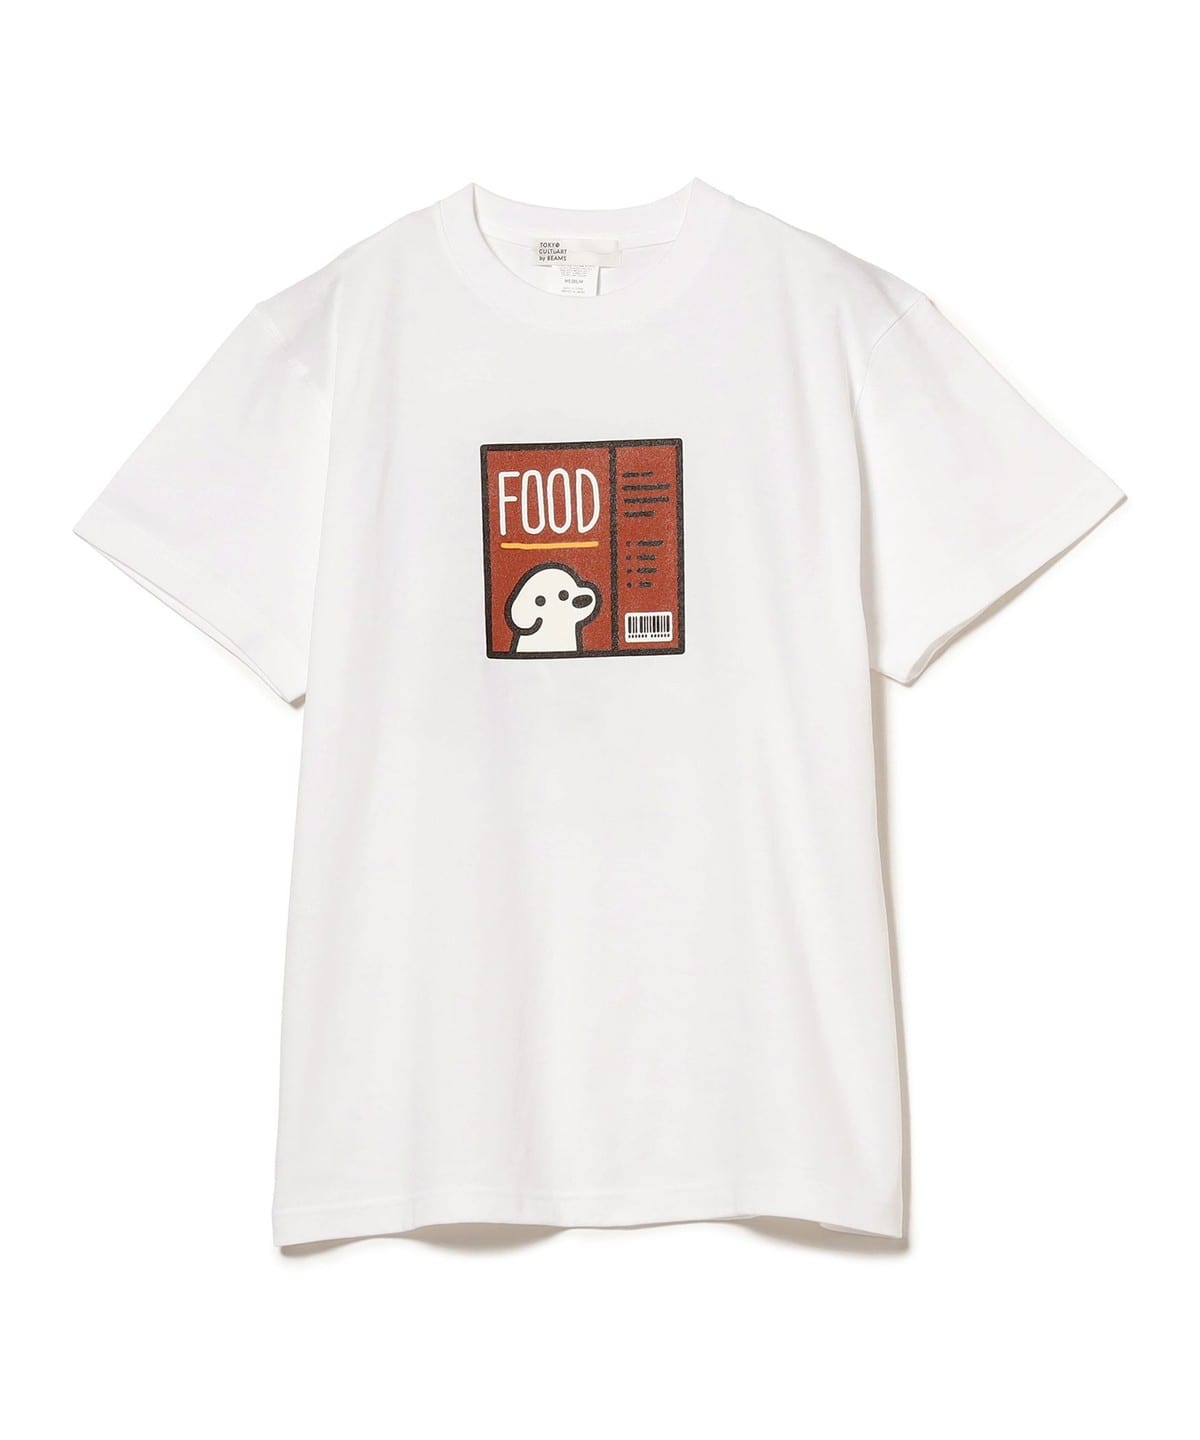 TOKYO CULTUART by BEAMS（トーキョー カルチャート by ビームス）matsui / Food Tee（Tシャツ・カットソー  プリントTシャツ）通販｜BEAMS